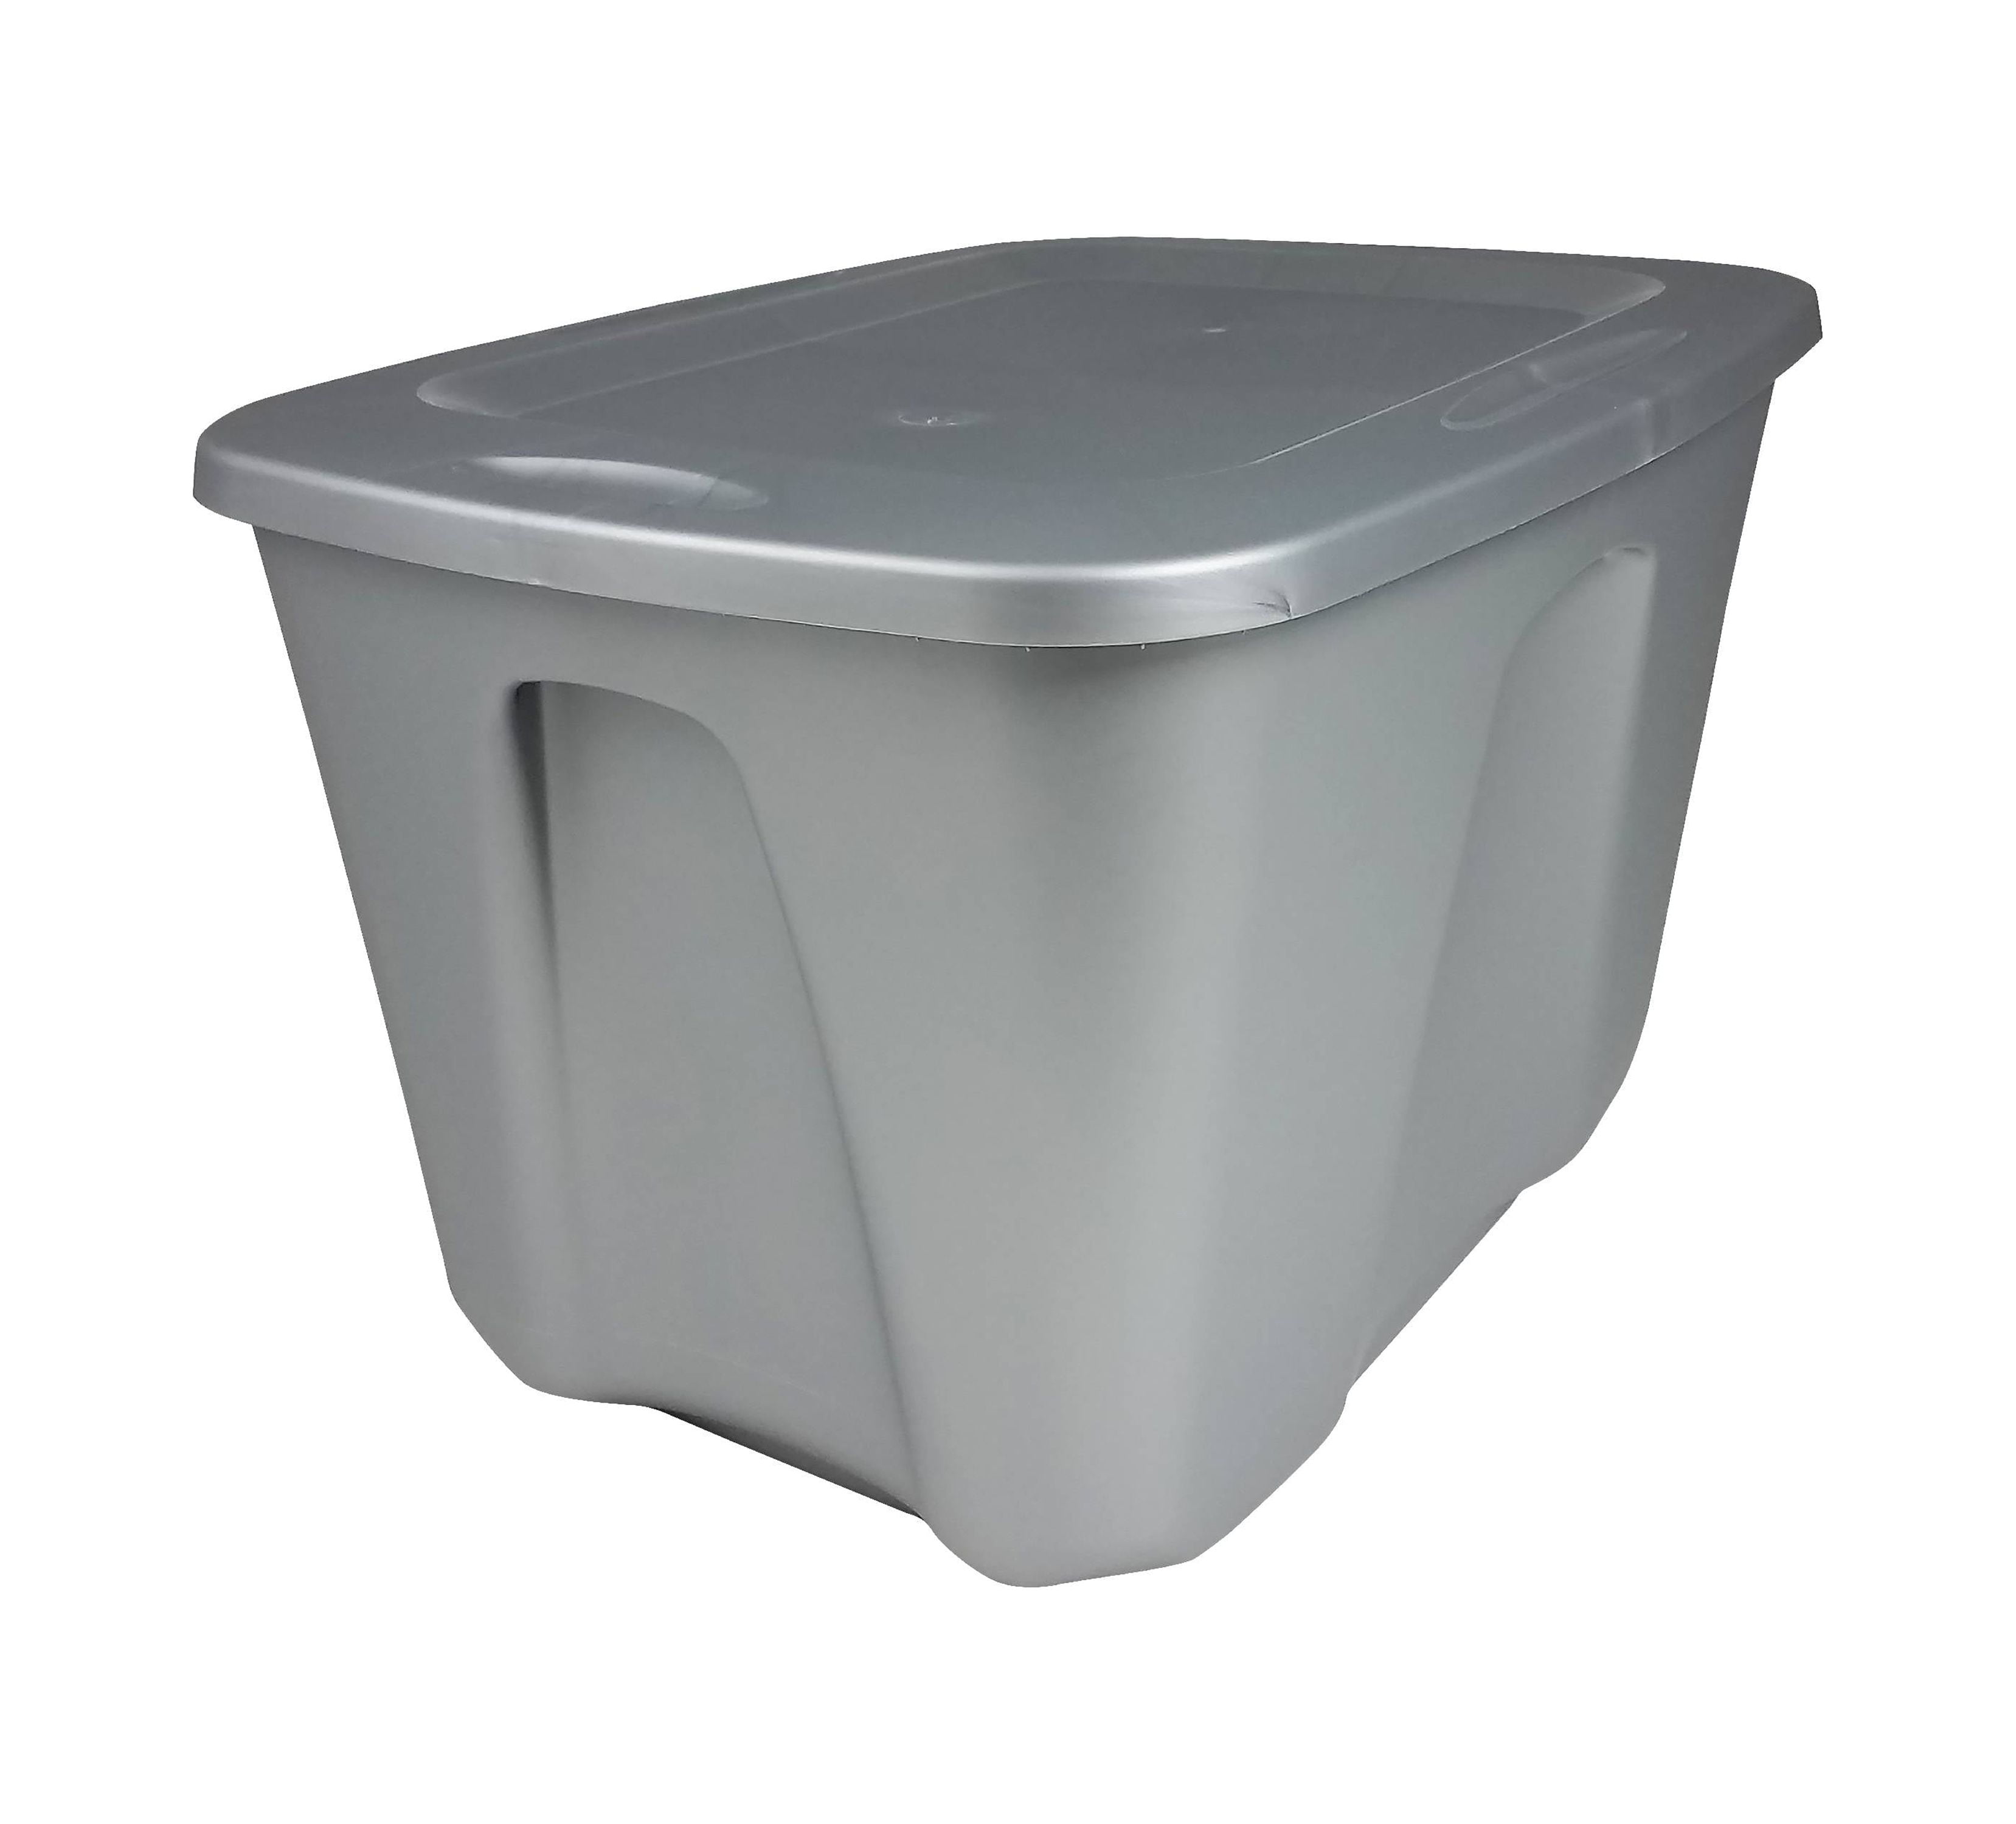 Hefty Medium 16.5-Gallons (66-Quart) Clear Base with White Lid